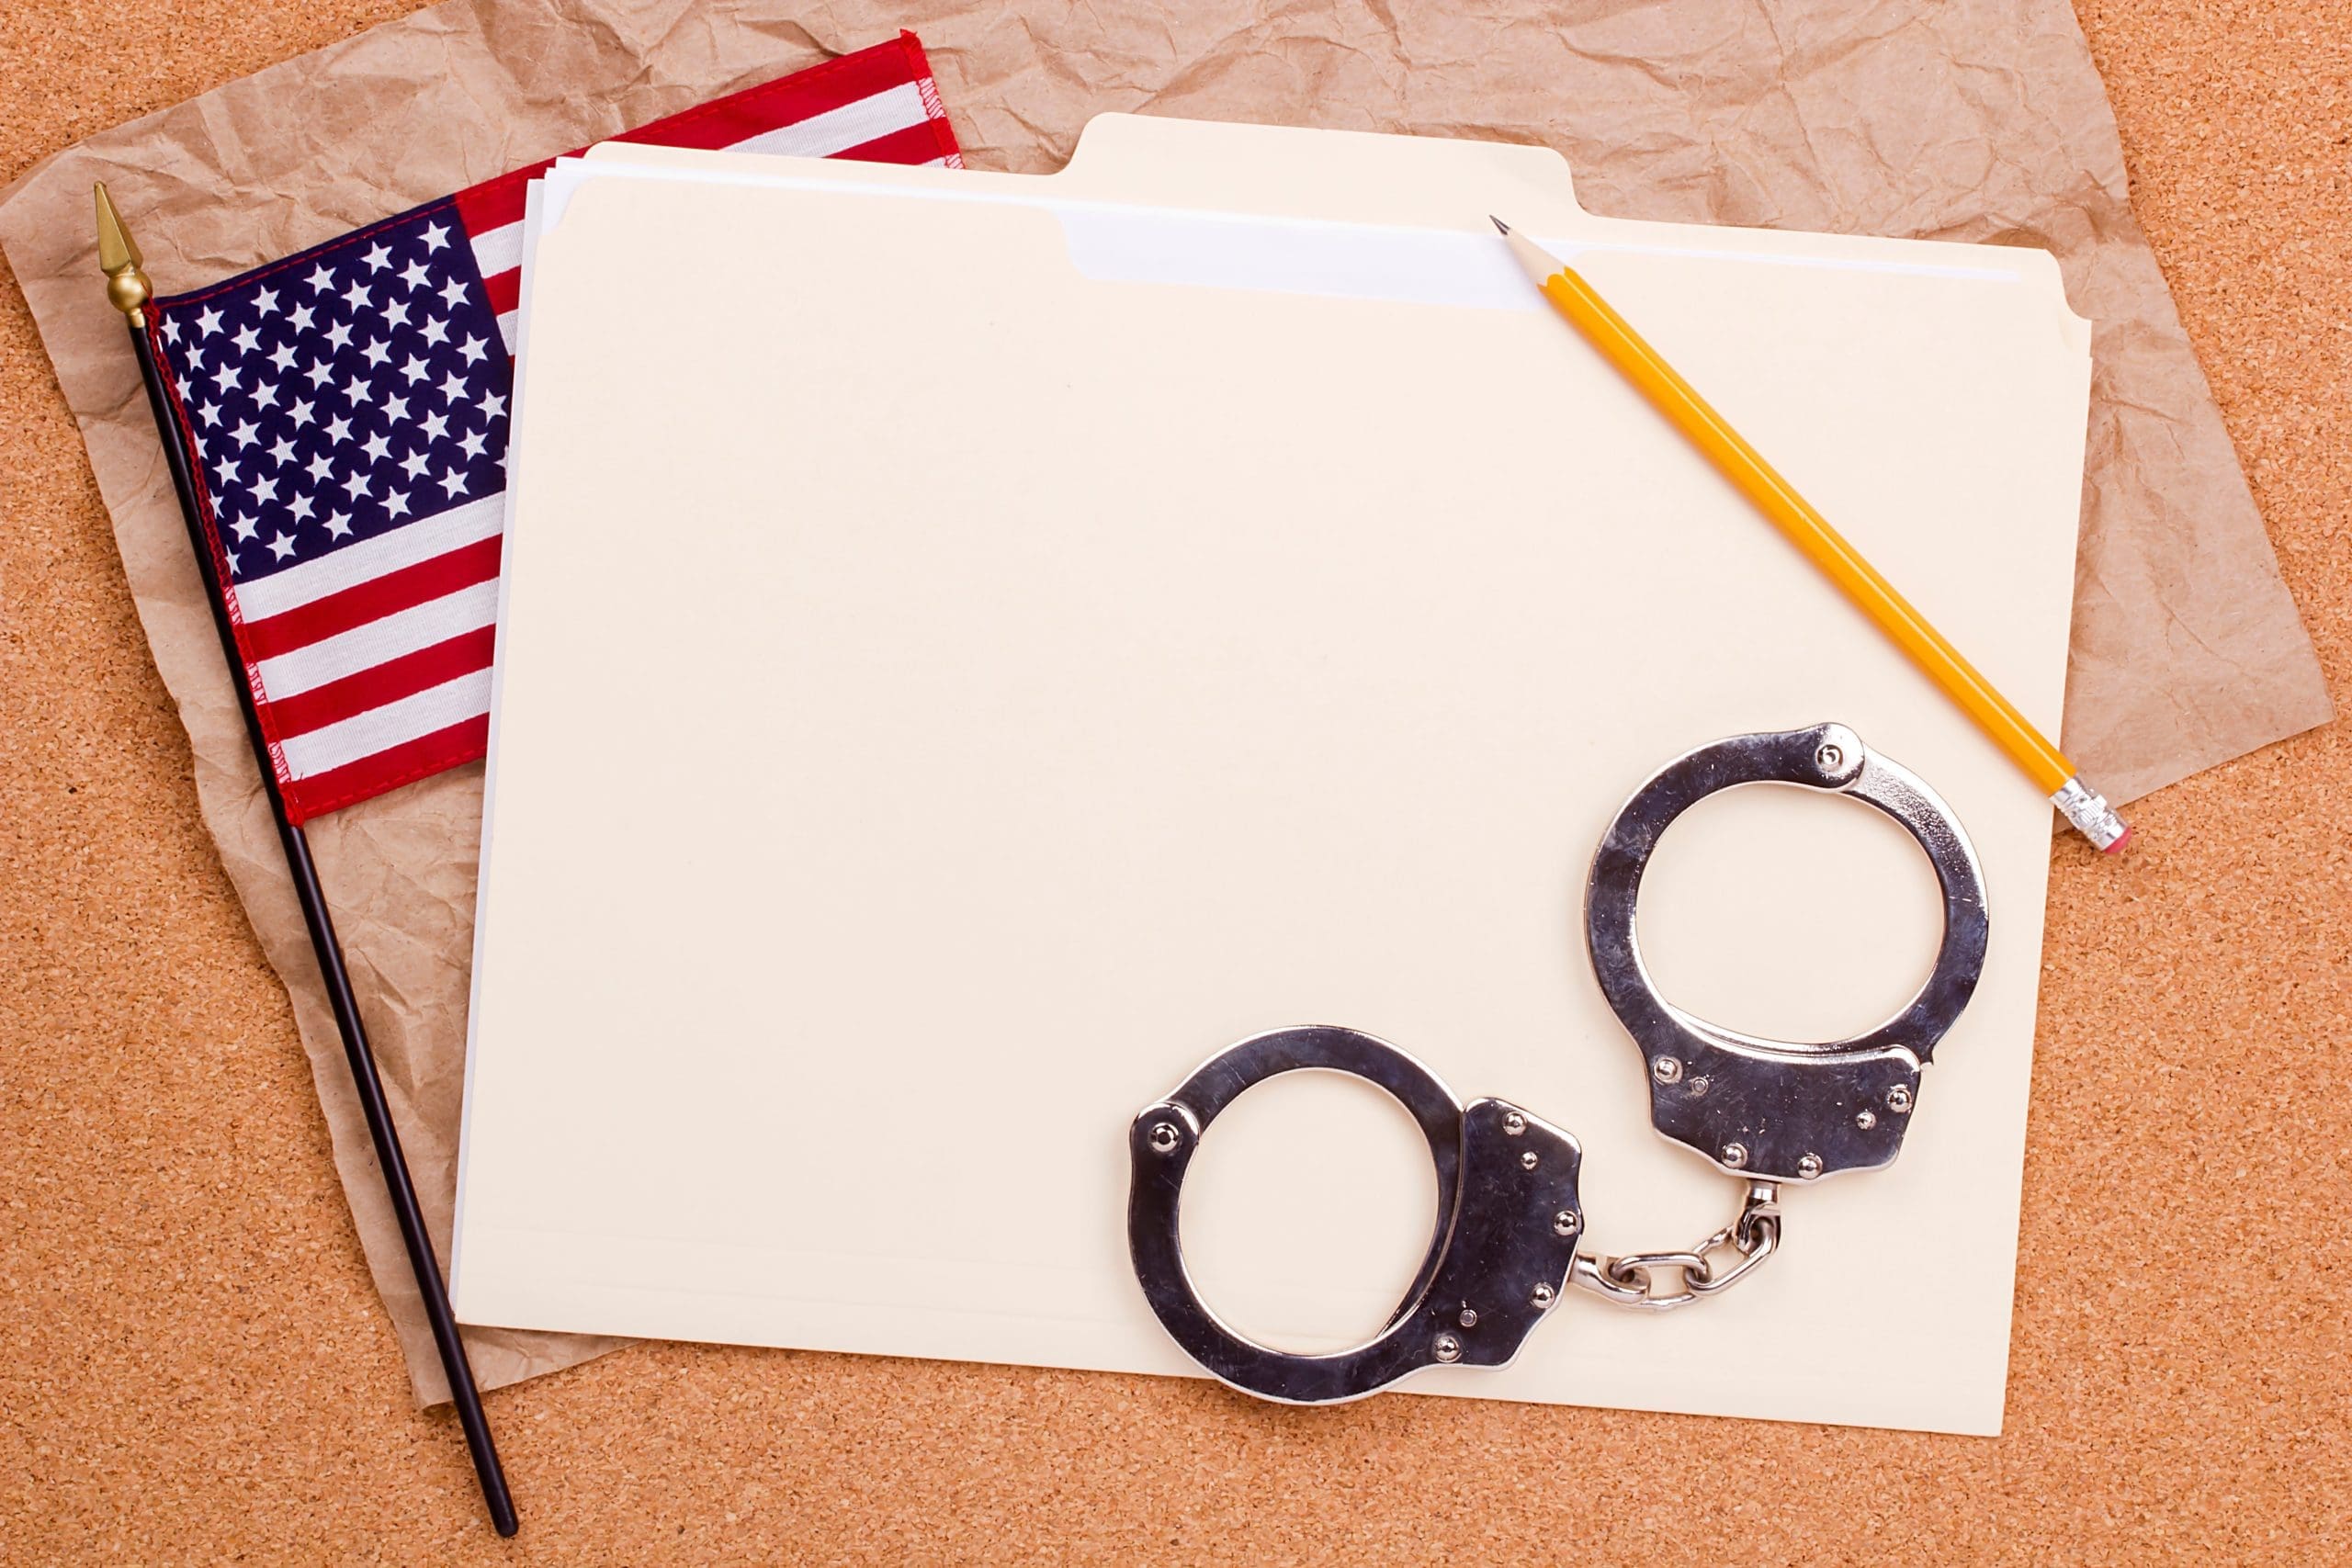 Handcuffs and an american flag on a corkboard.